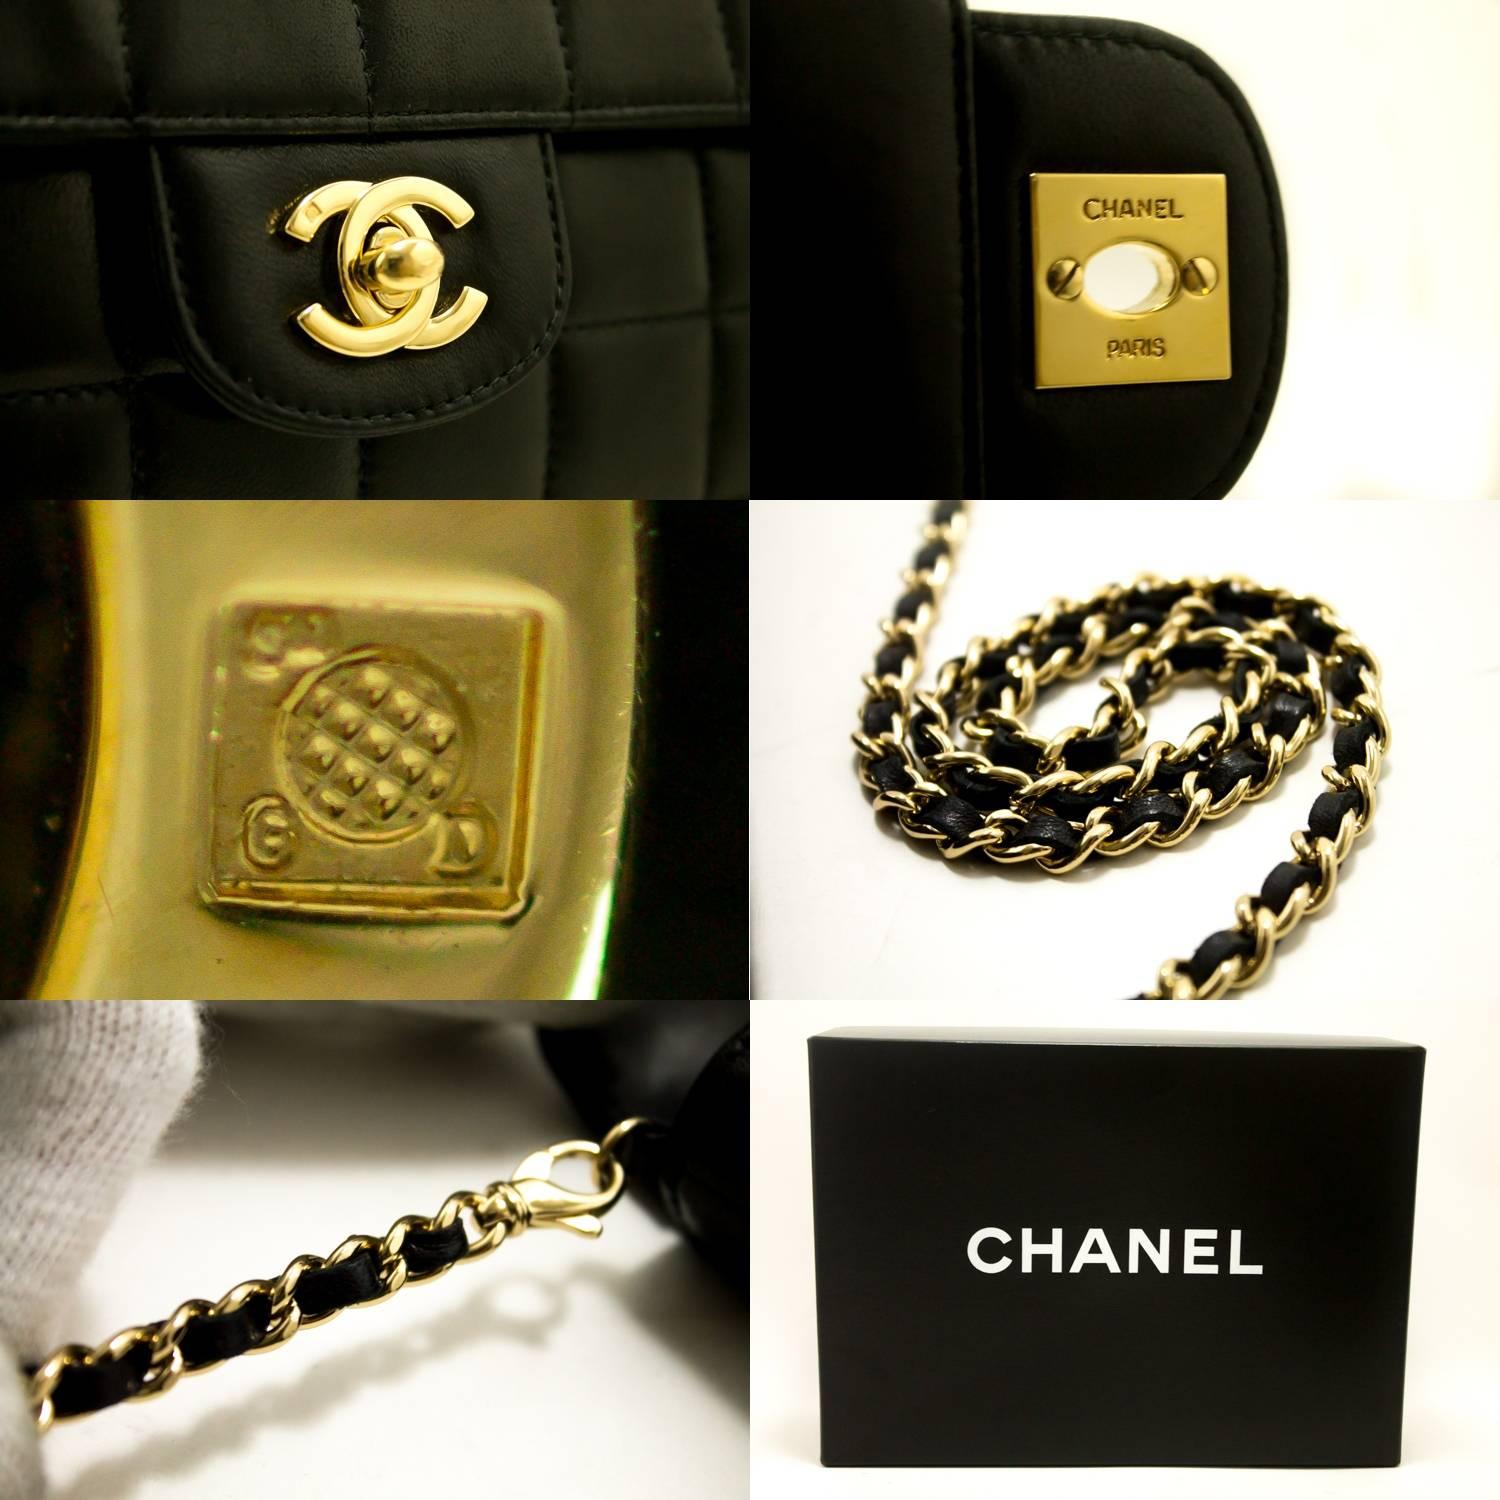 CHANEL Chocolate Bar Gold Chain Shoulder Bag Clutch Black Quilted 2